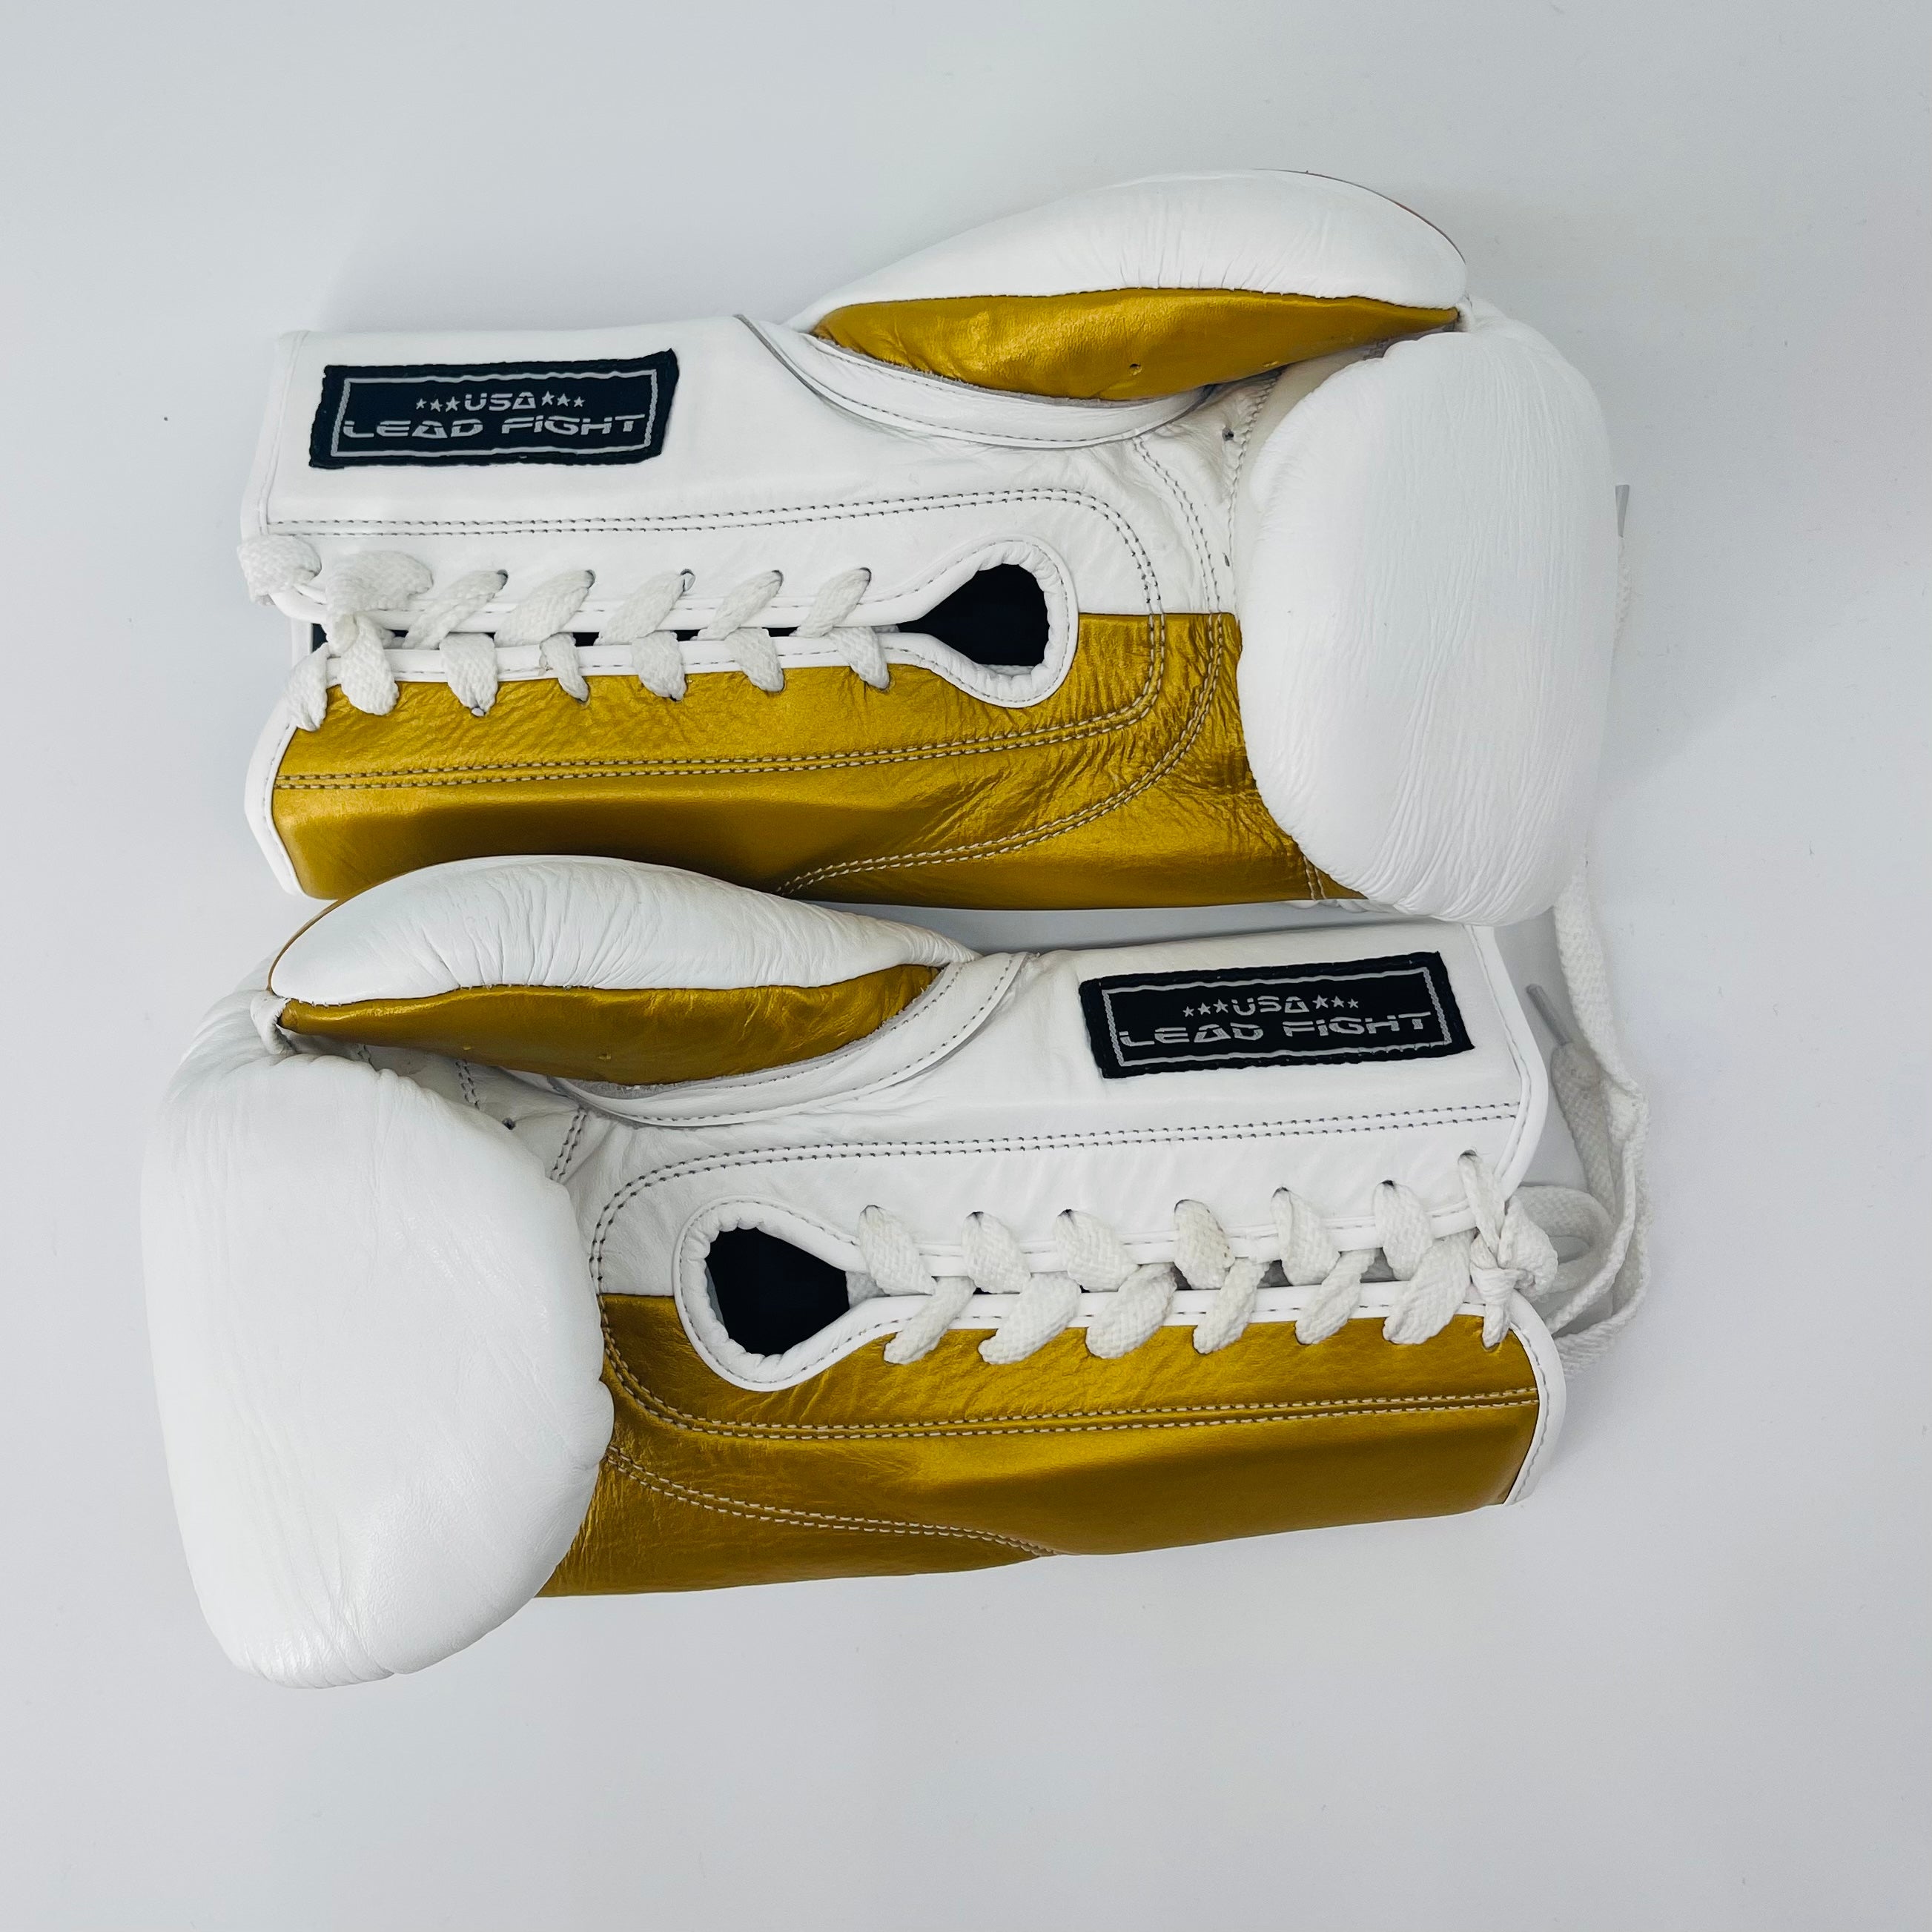 LEAD Boxing Fight Gloves (White /Gold)